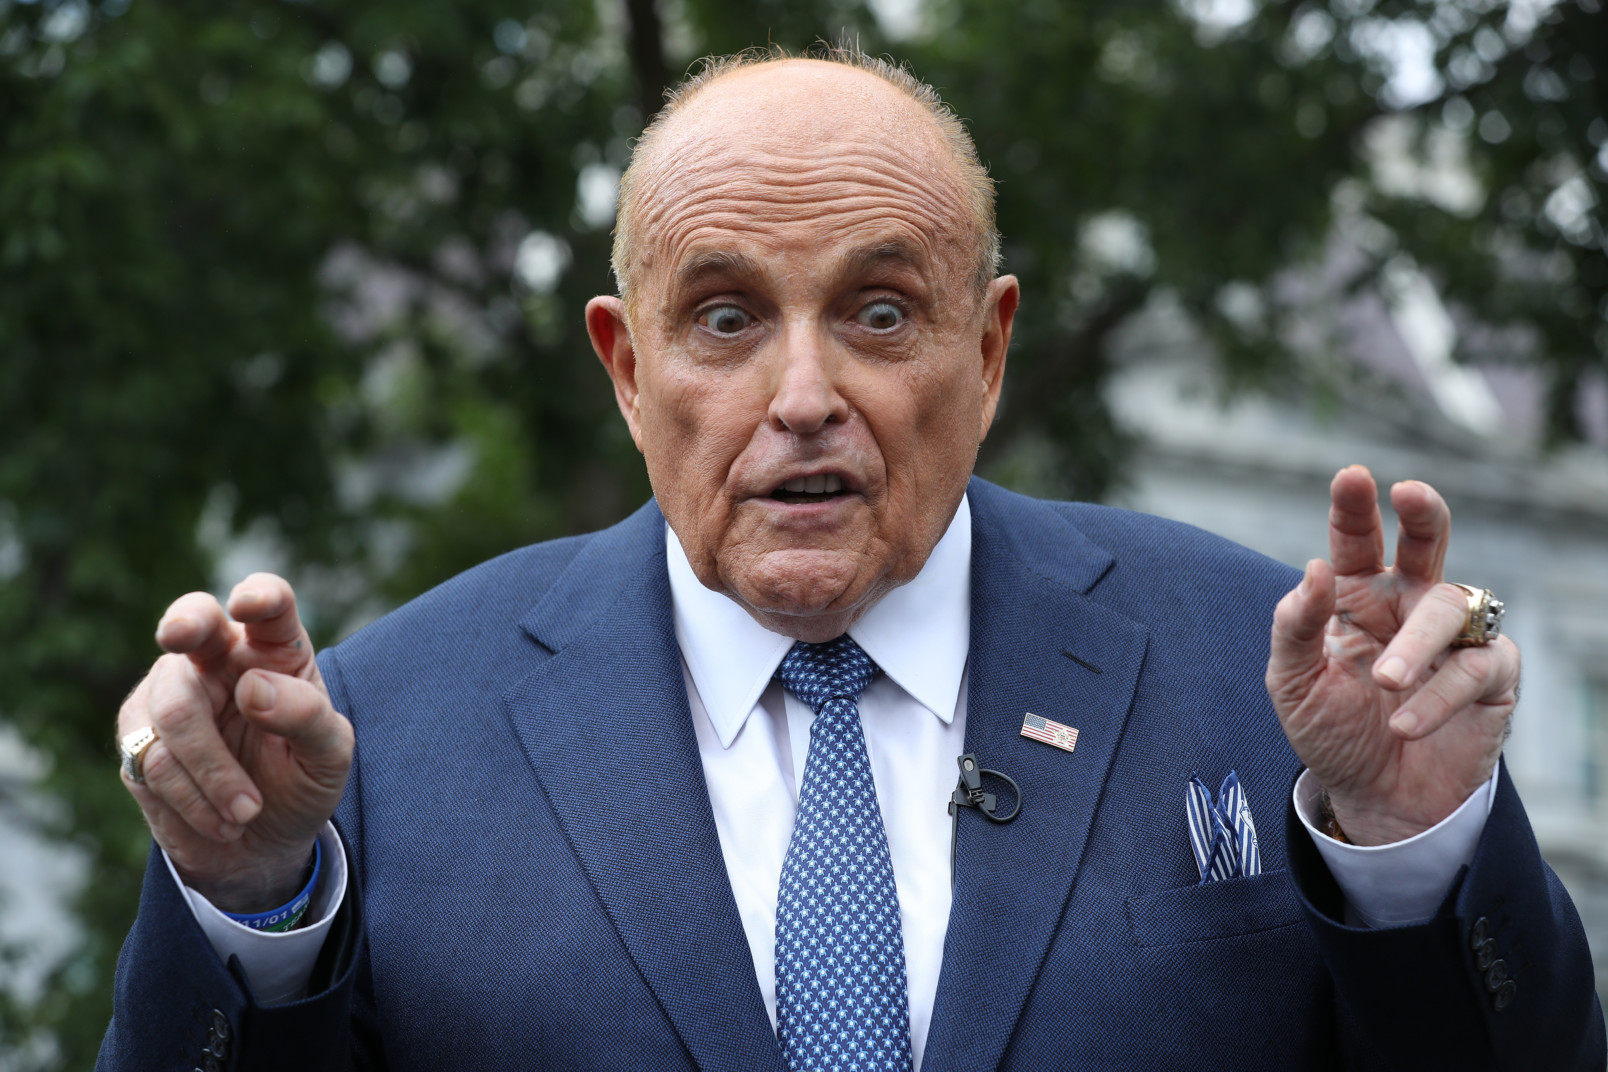 Rudy Giuliani Used A Female Alias In Emails About Plan To Overturn The Election (talkingpointsmemo.com)